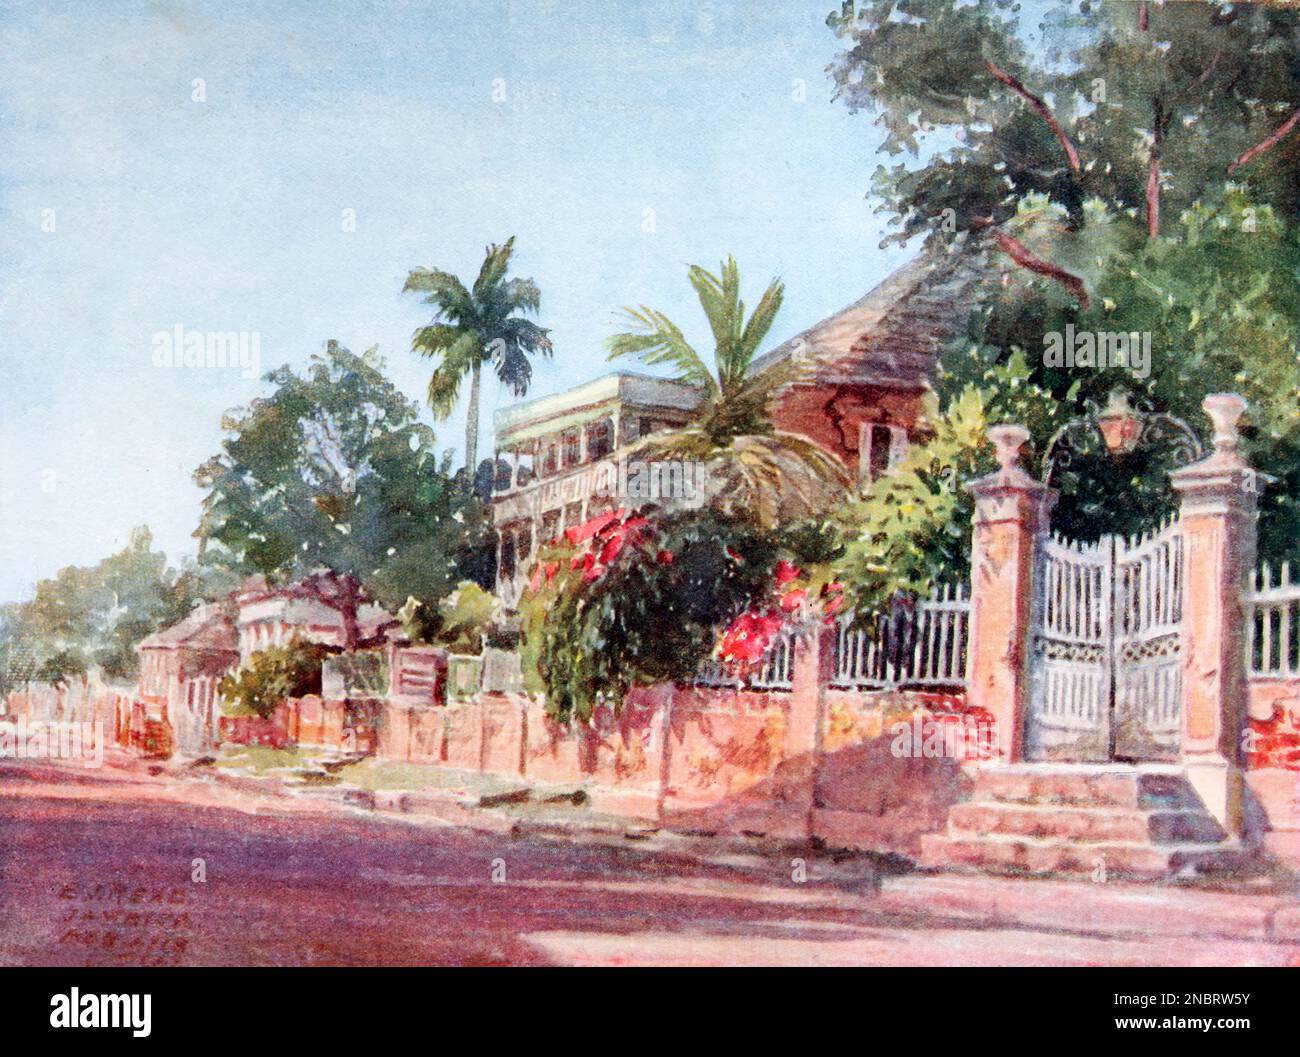 Duke Street. Kingston, Jamaica from the book Panama and the Canal in picture and prose : a complete story of Panama, as well as the history, purpose and promise of its world-famous canal the most gigantic engineering undertaking since the dawn of time by Willis John Abbot,1863-1934 Published in London ; New York by Syndicate Publishing Co. in 1913 Stock Photo